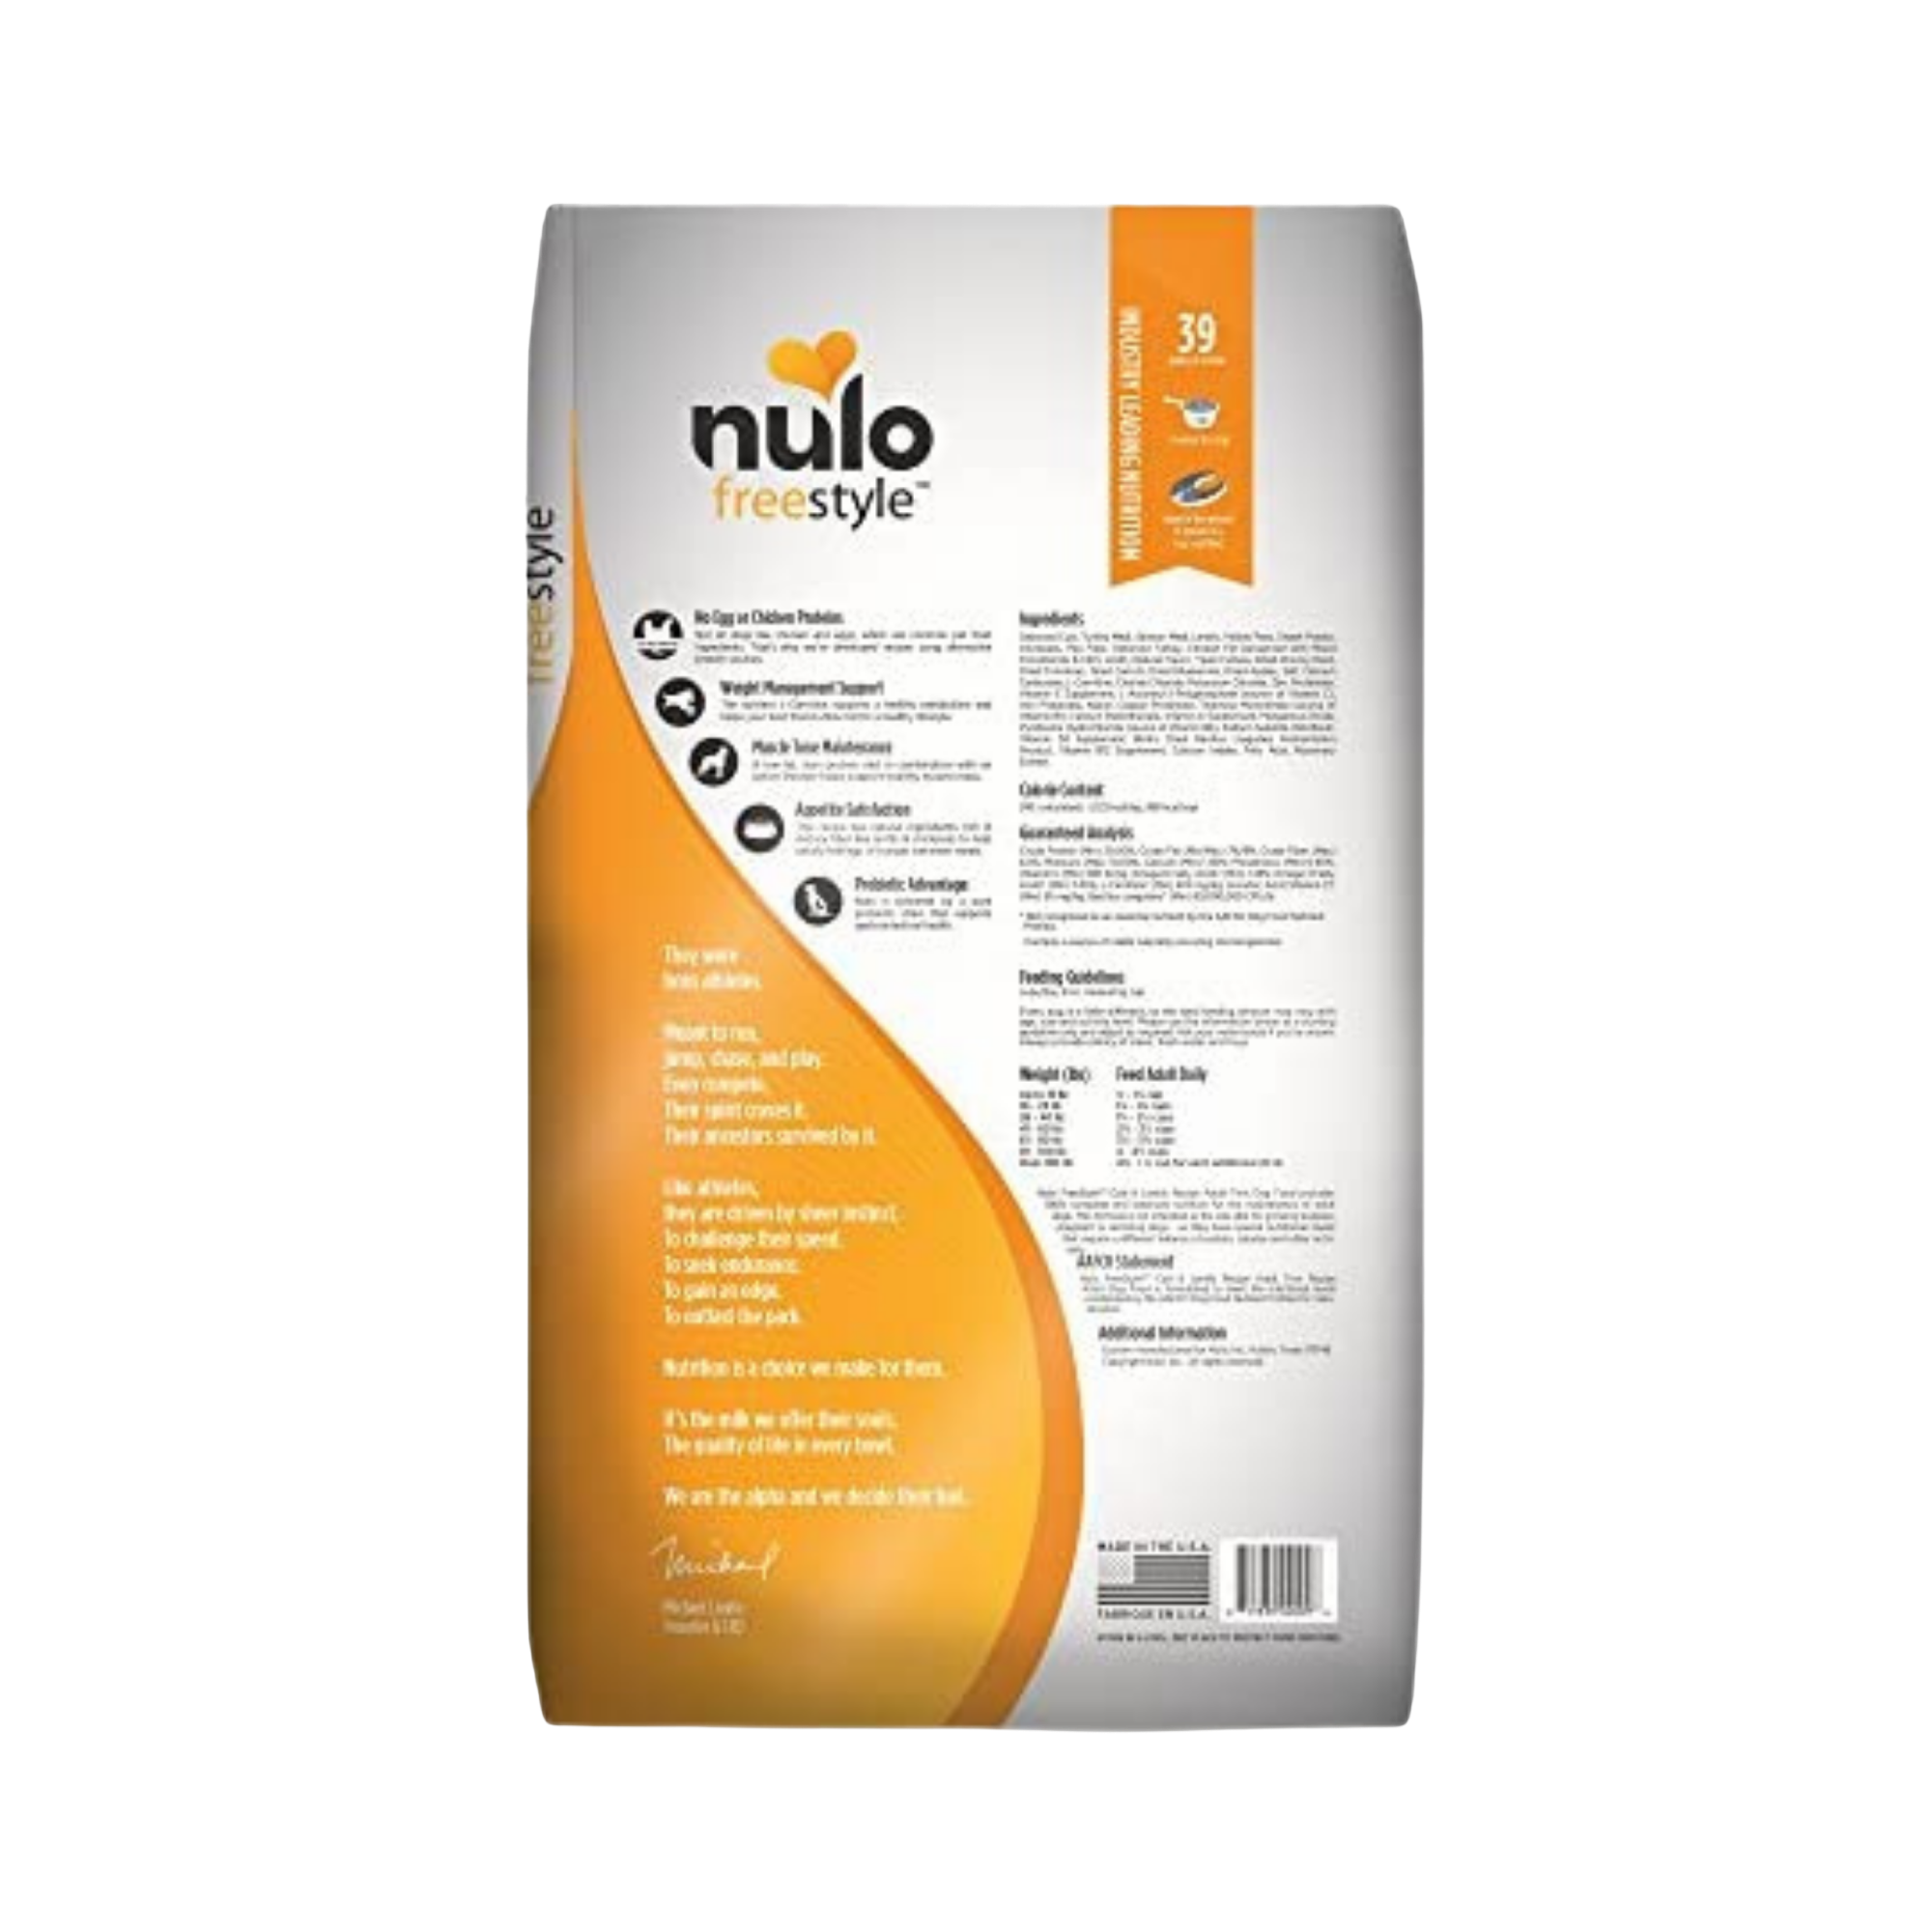 Nulo Freestyle Grain-Free Adult Trim Cod & Lentils Recipe Dry Dog Food - Mutts & Co.